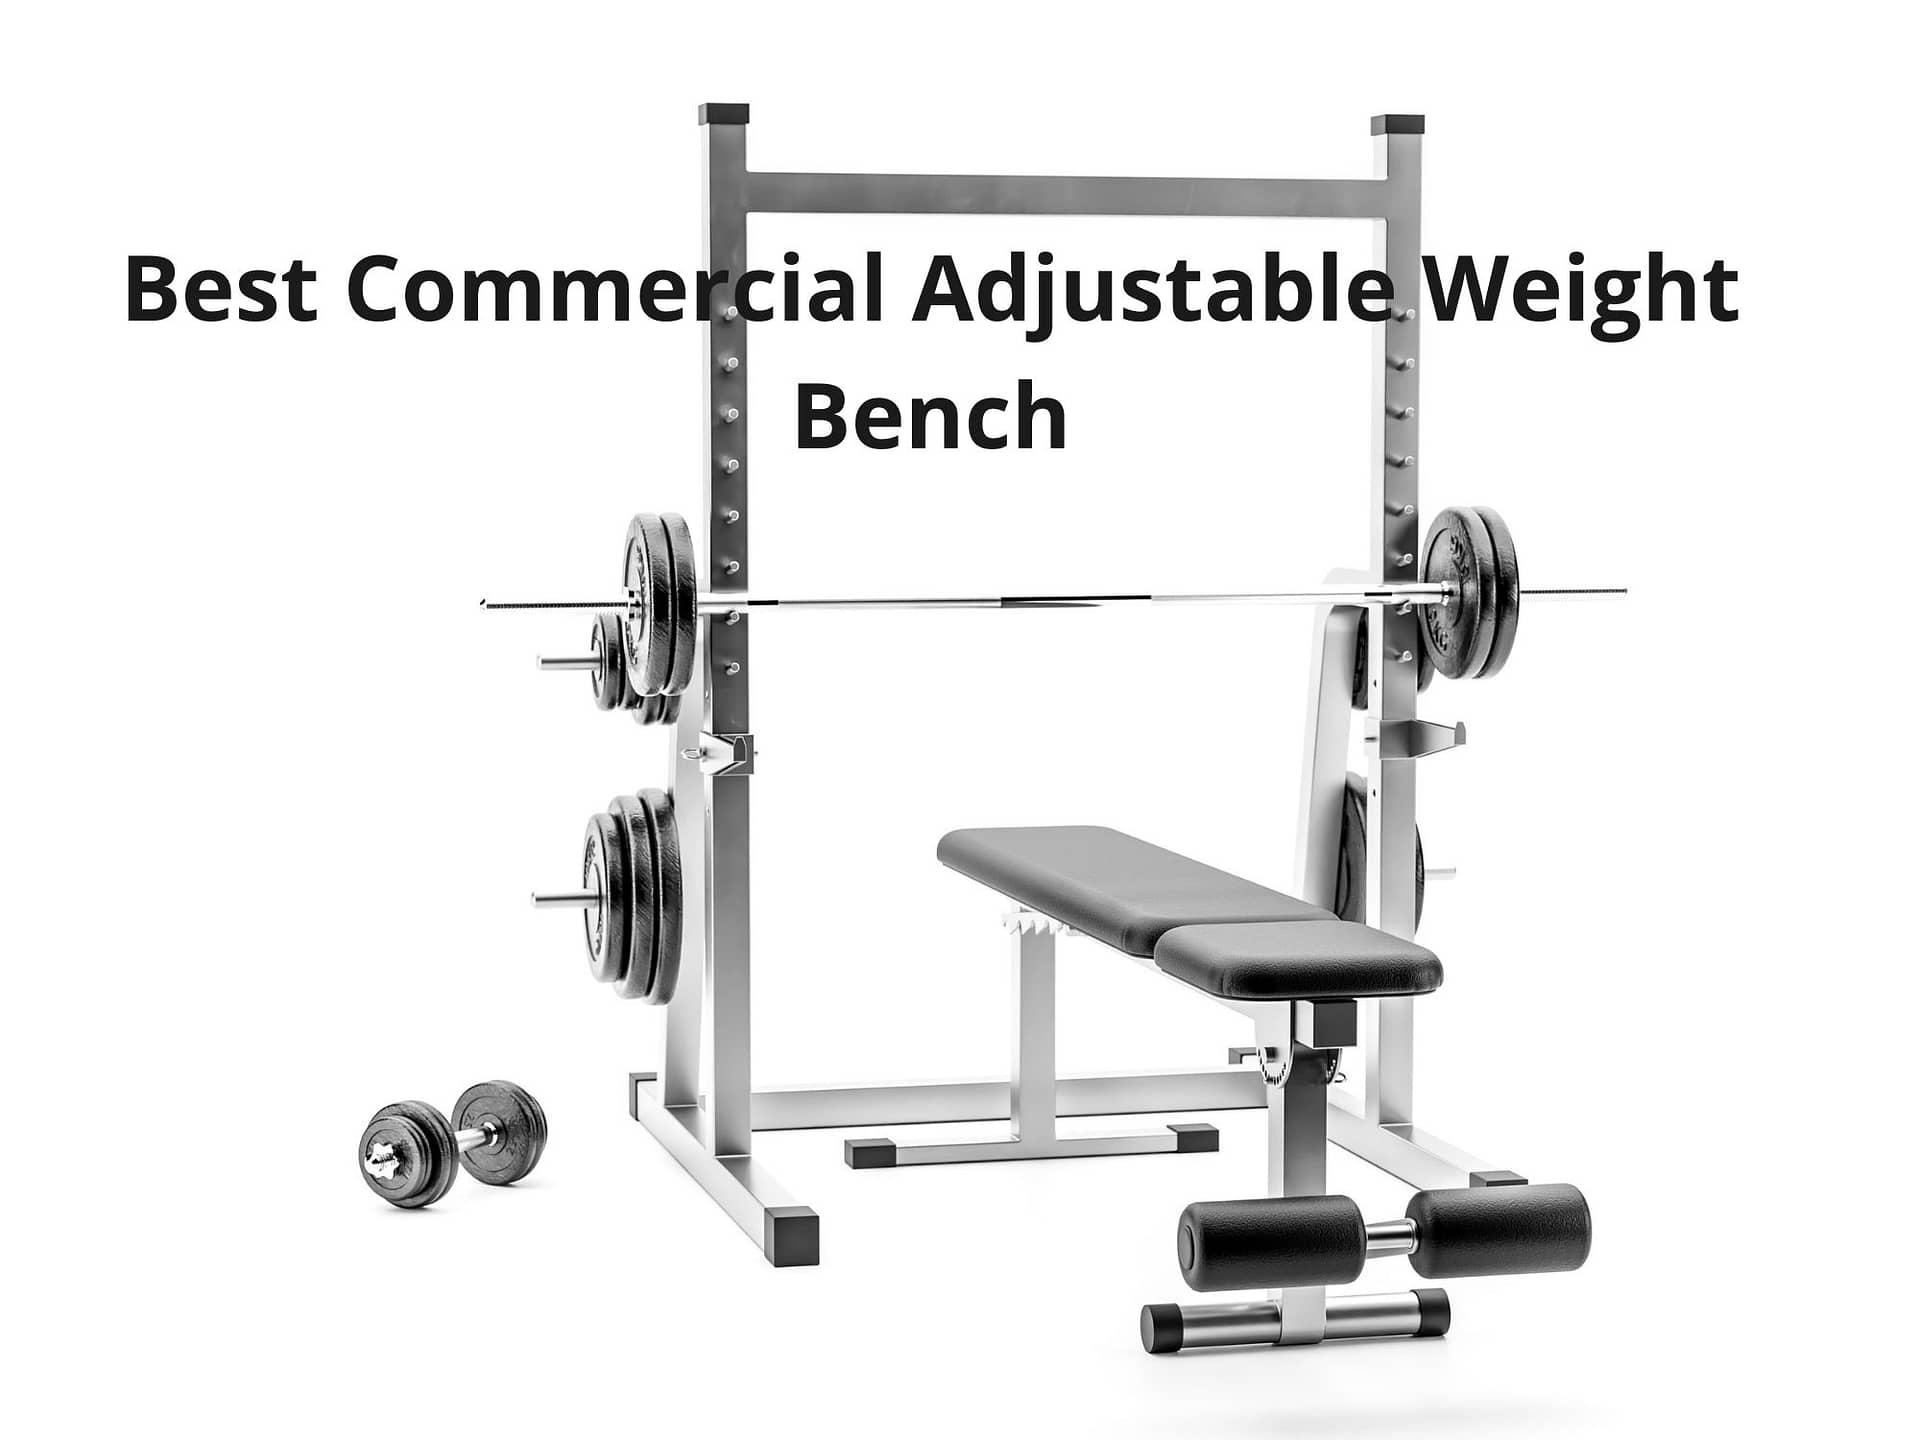 Best Commercial Adjustable Weight Bench